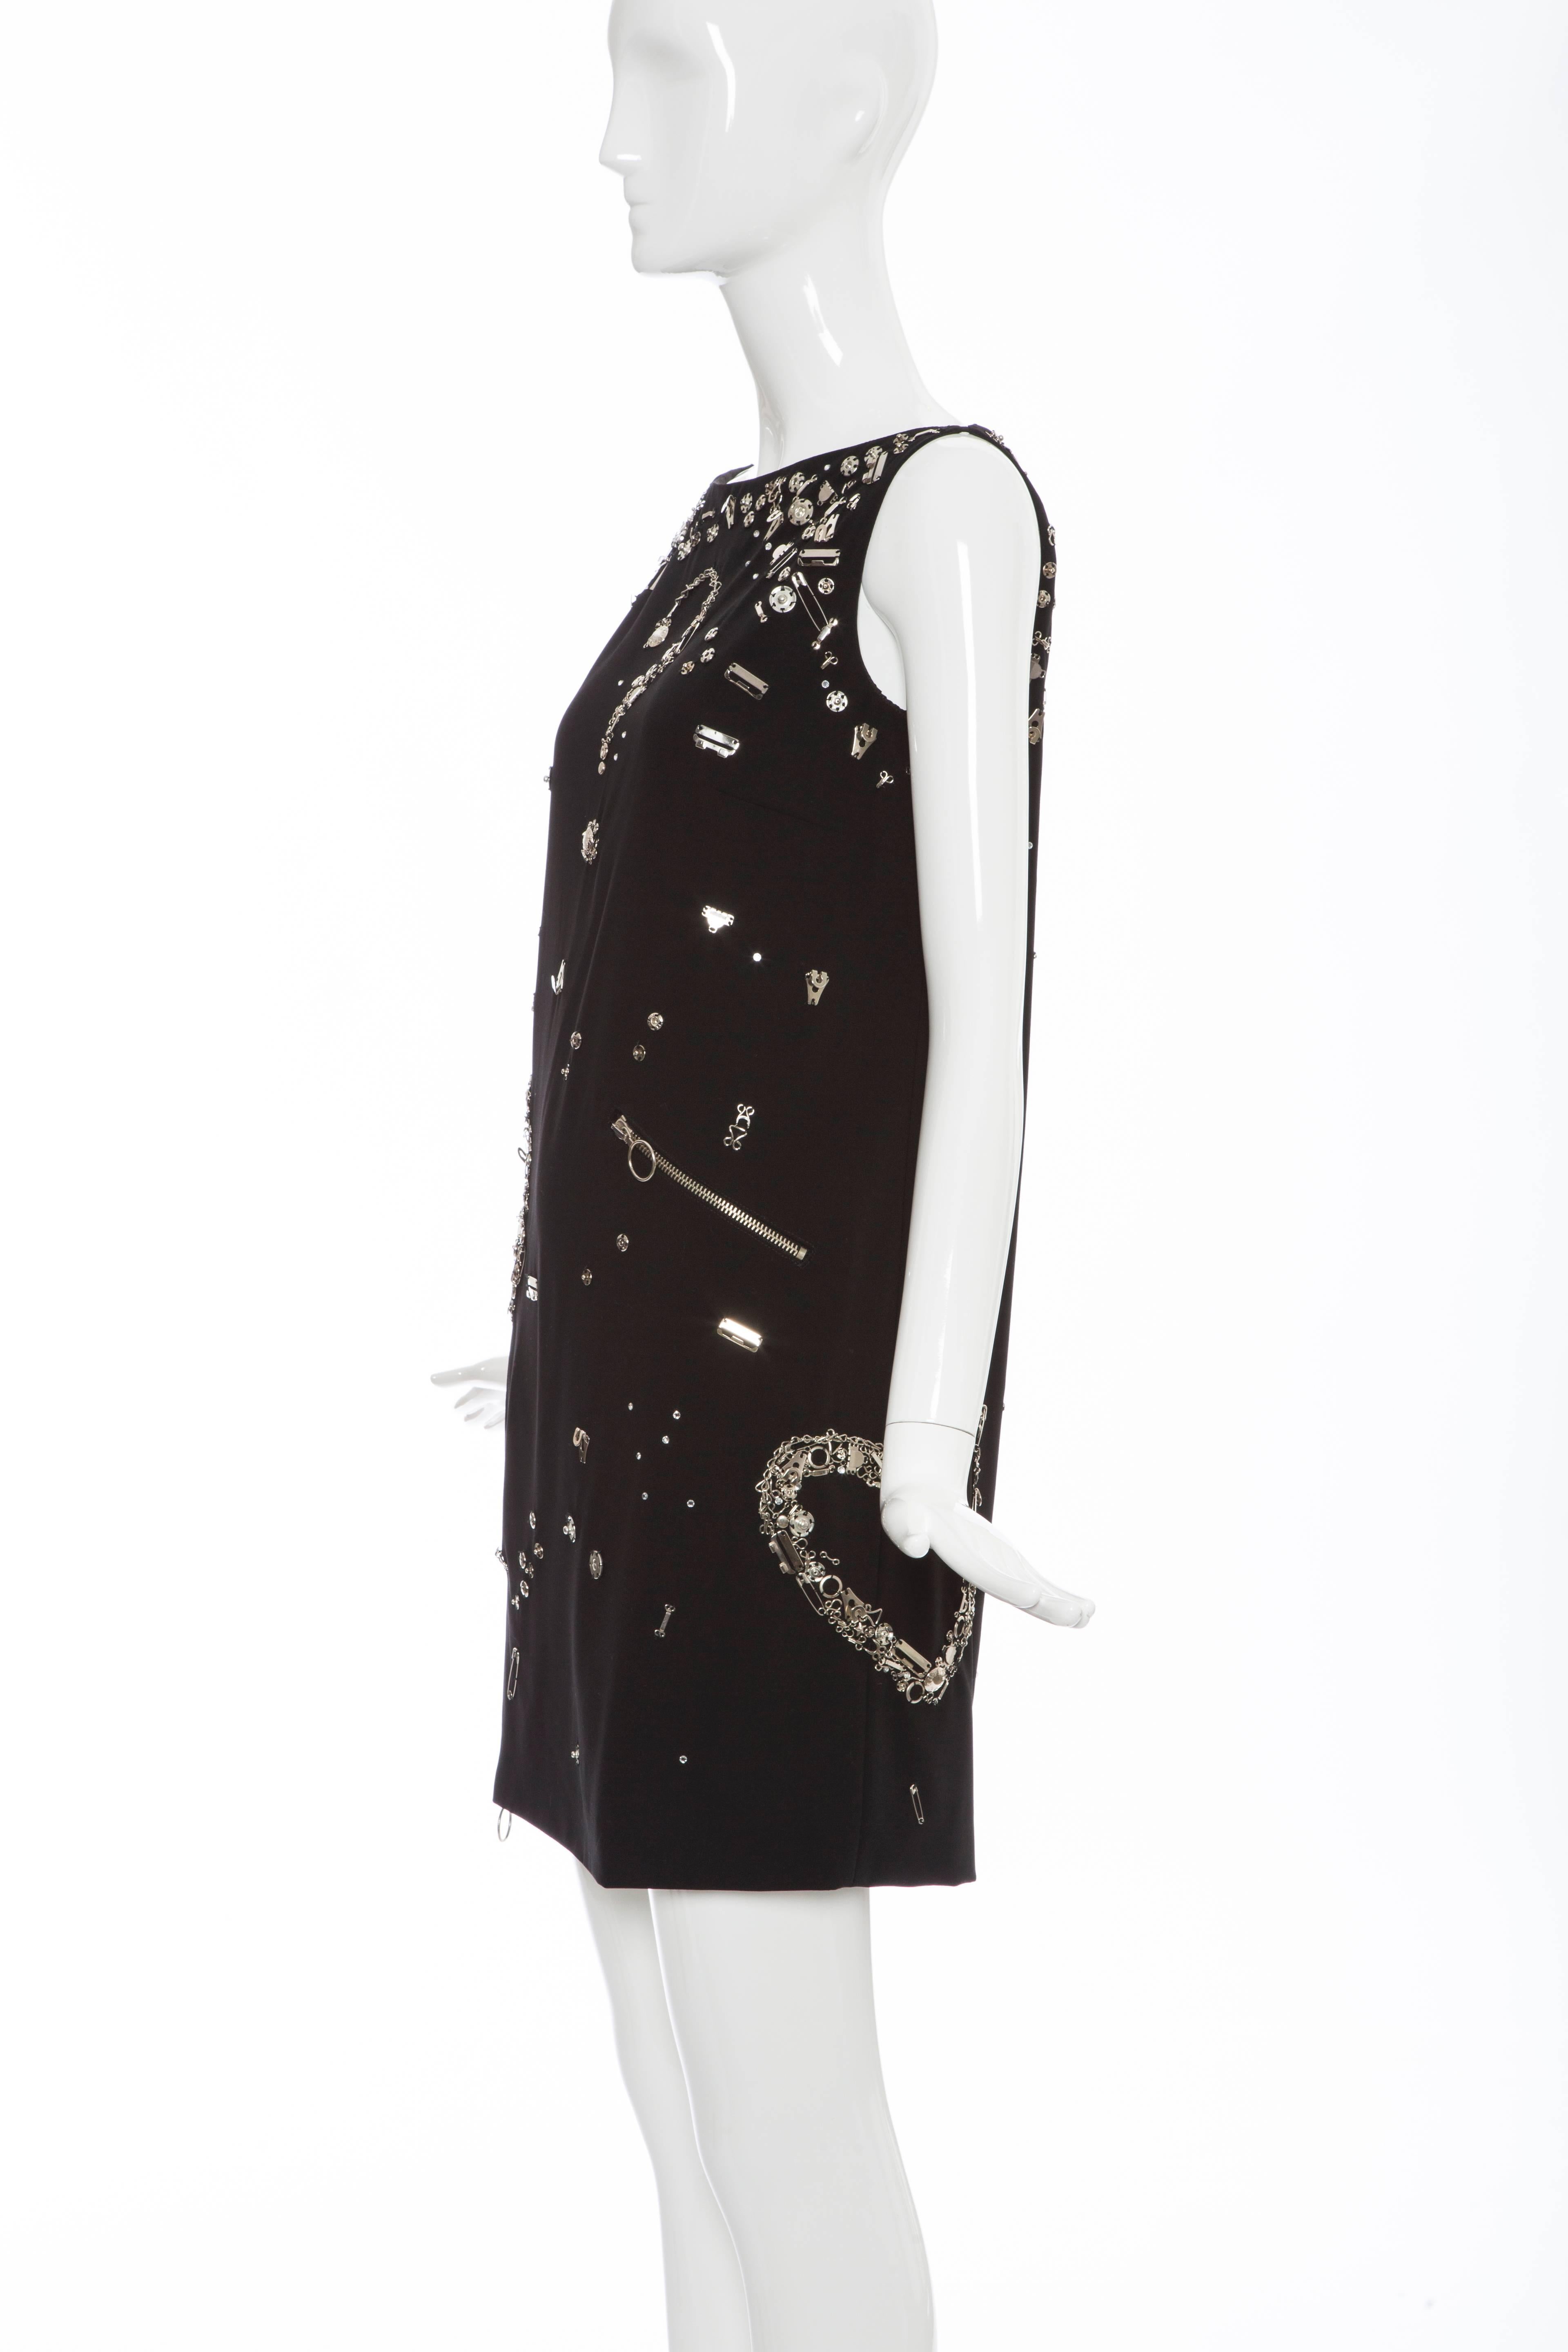 Moschino Couture Runway Black Sleeveless Safety Pin Embellished Dress, Fall 2009 4